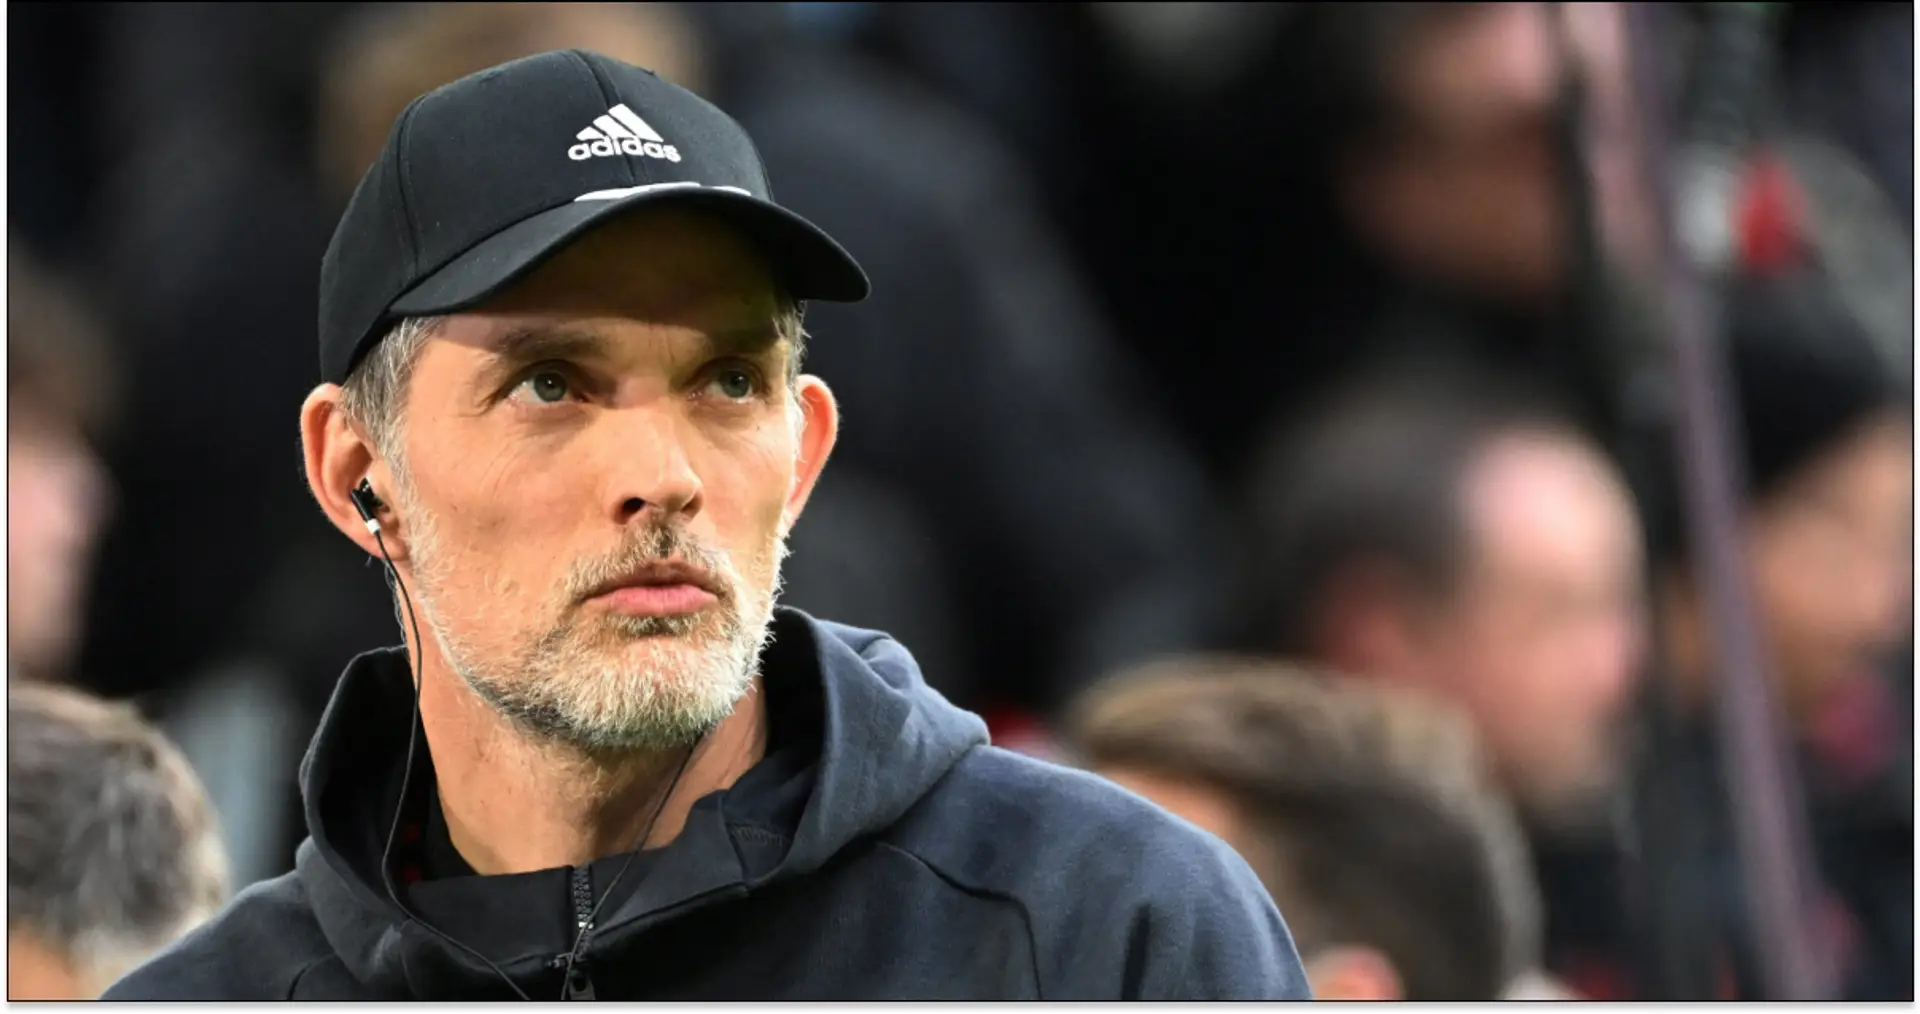 Bayern beat Dortmund 4-2 in Tuchel's first game in charge